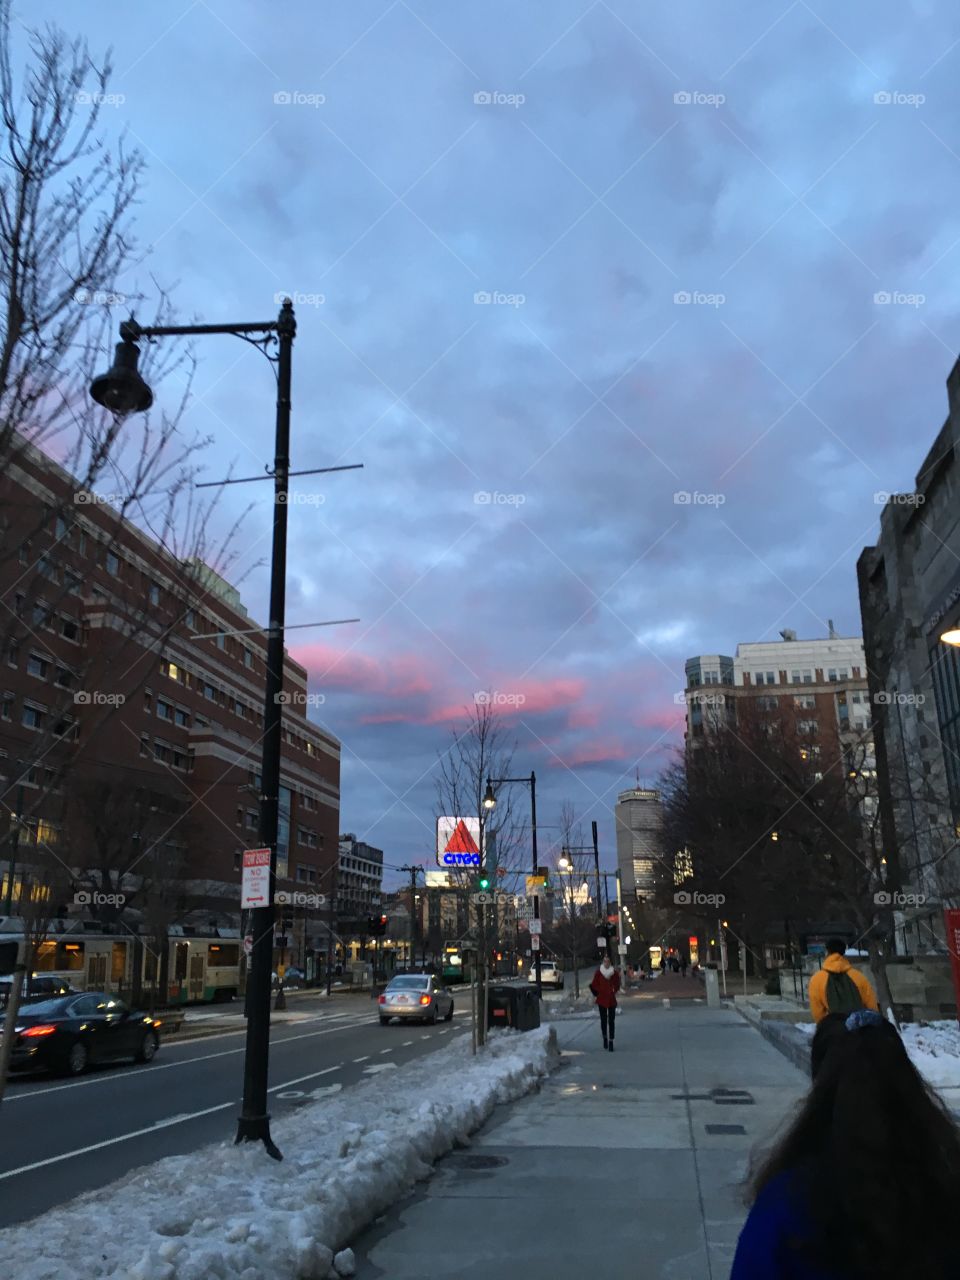 Cotton Candy Clouds over the Citgo Sign in Boston